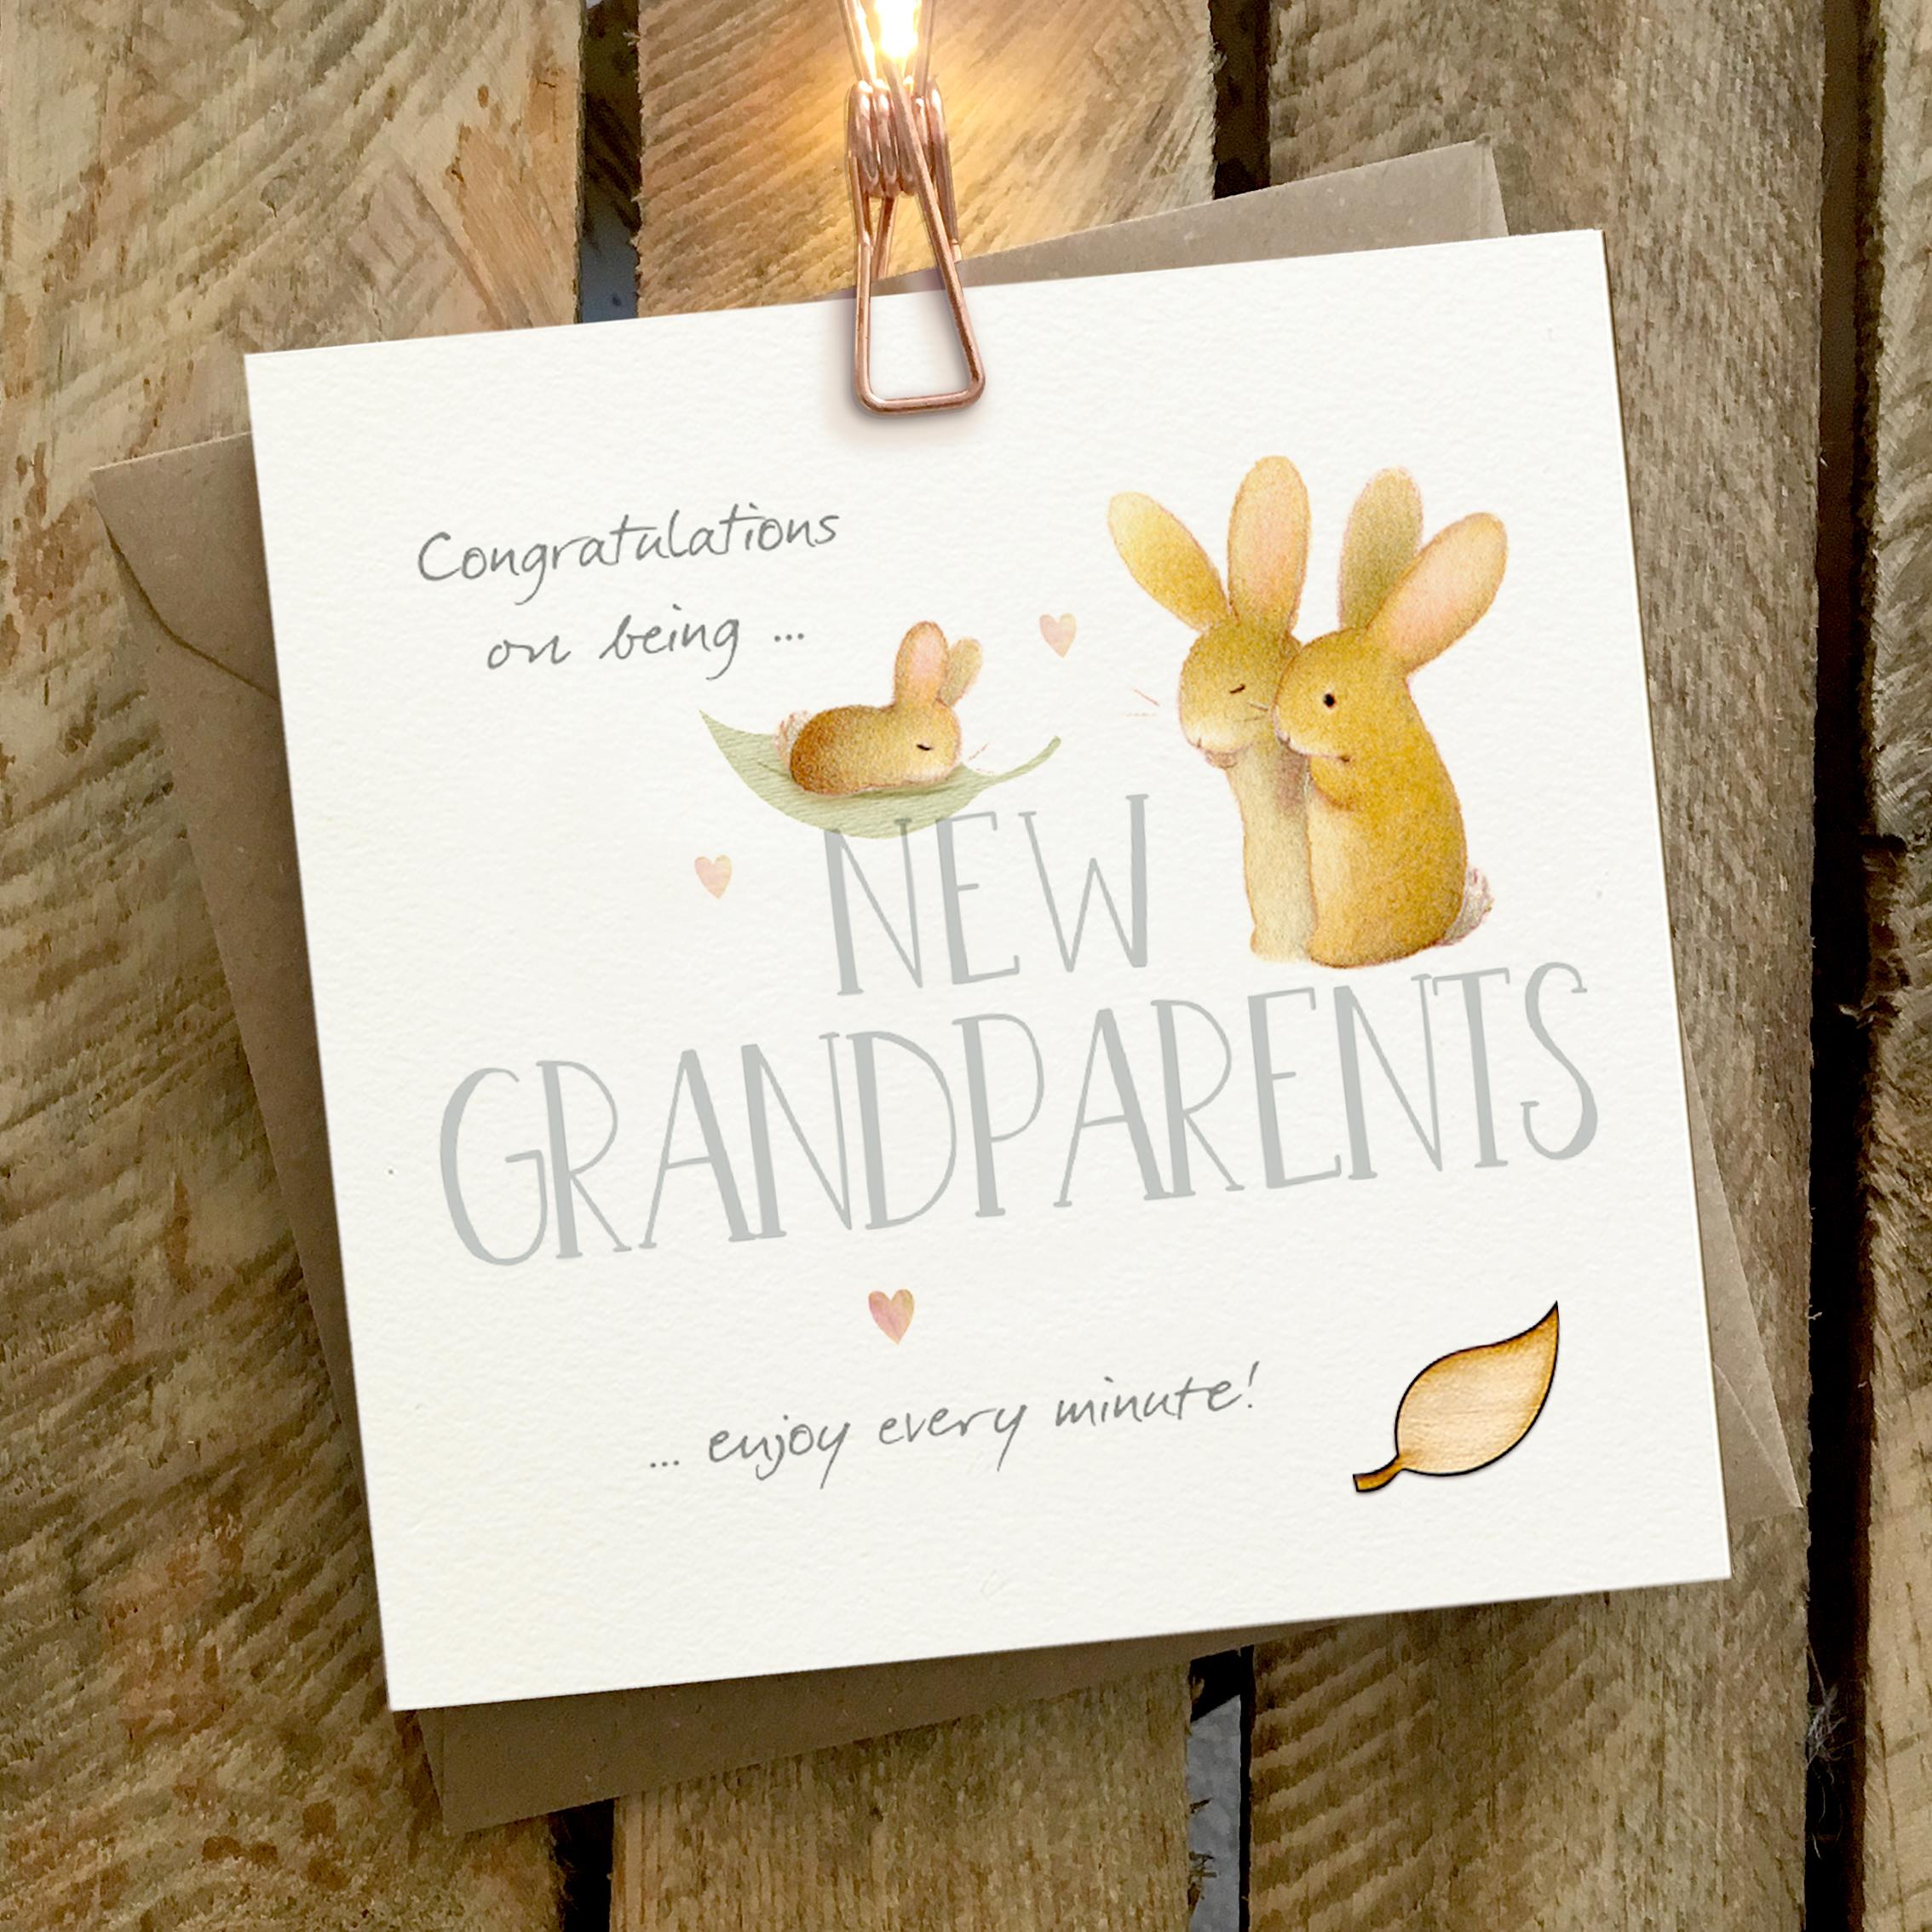 Card featuring a baby rabbit and two grandparent rabbits with a large NEW GRANDPARENTS caption